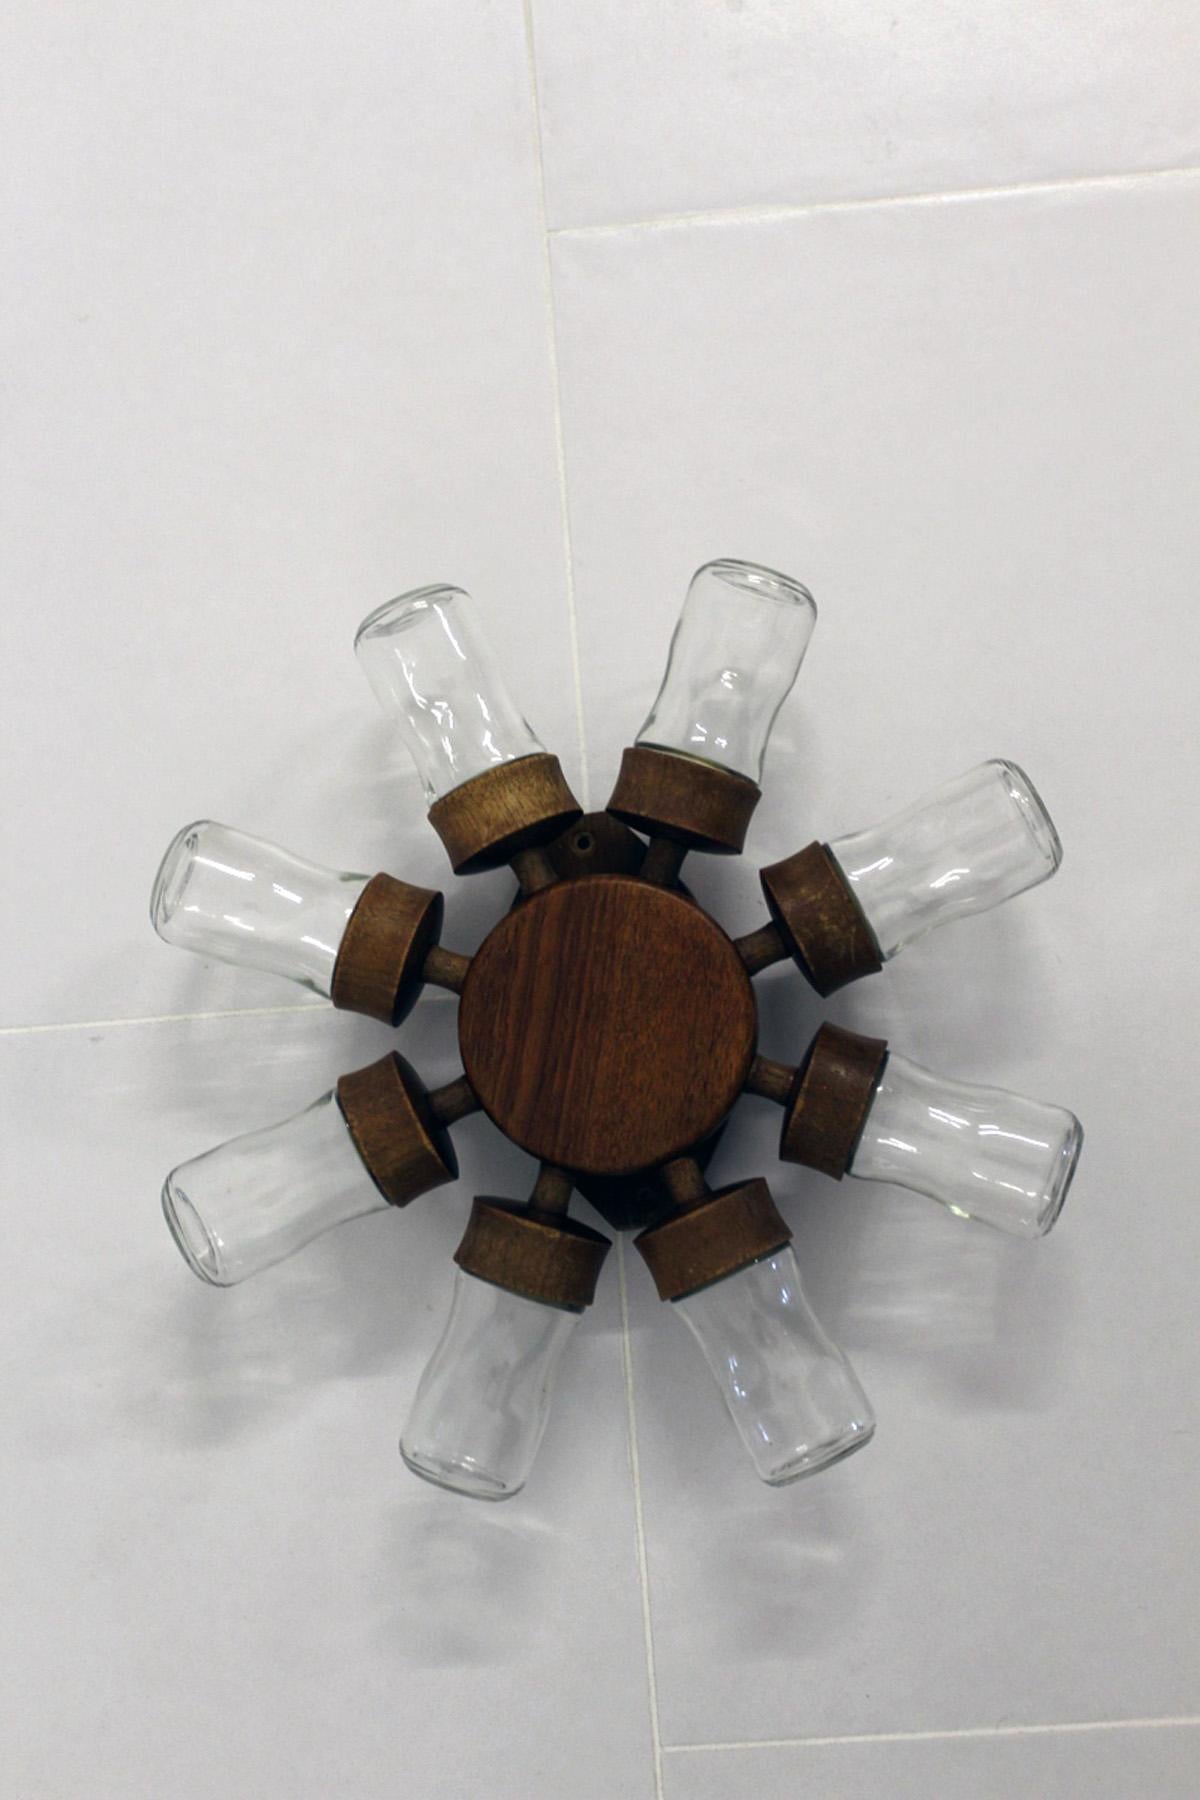 This spice wheel for wall mounting with rotating teak wood frame features 8 removable glasses as containers for spices. Original from the 1960s.